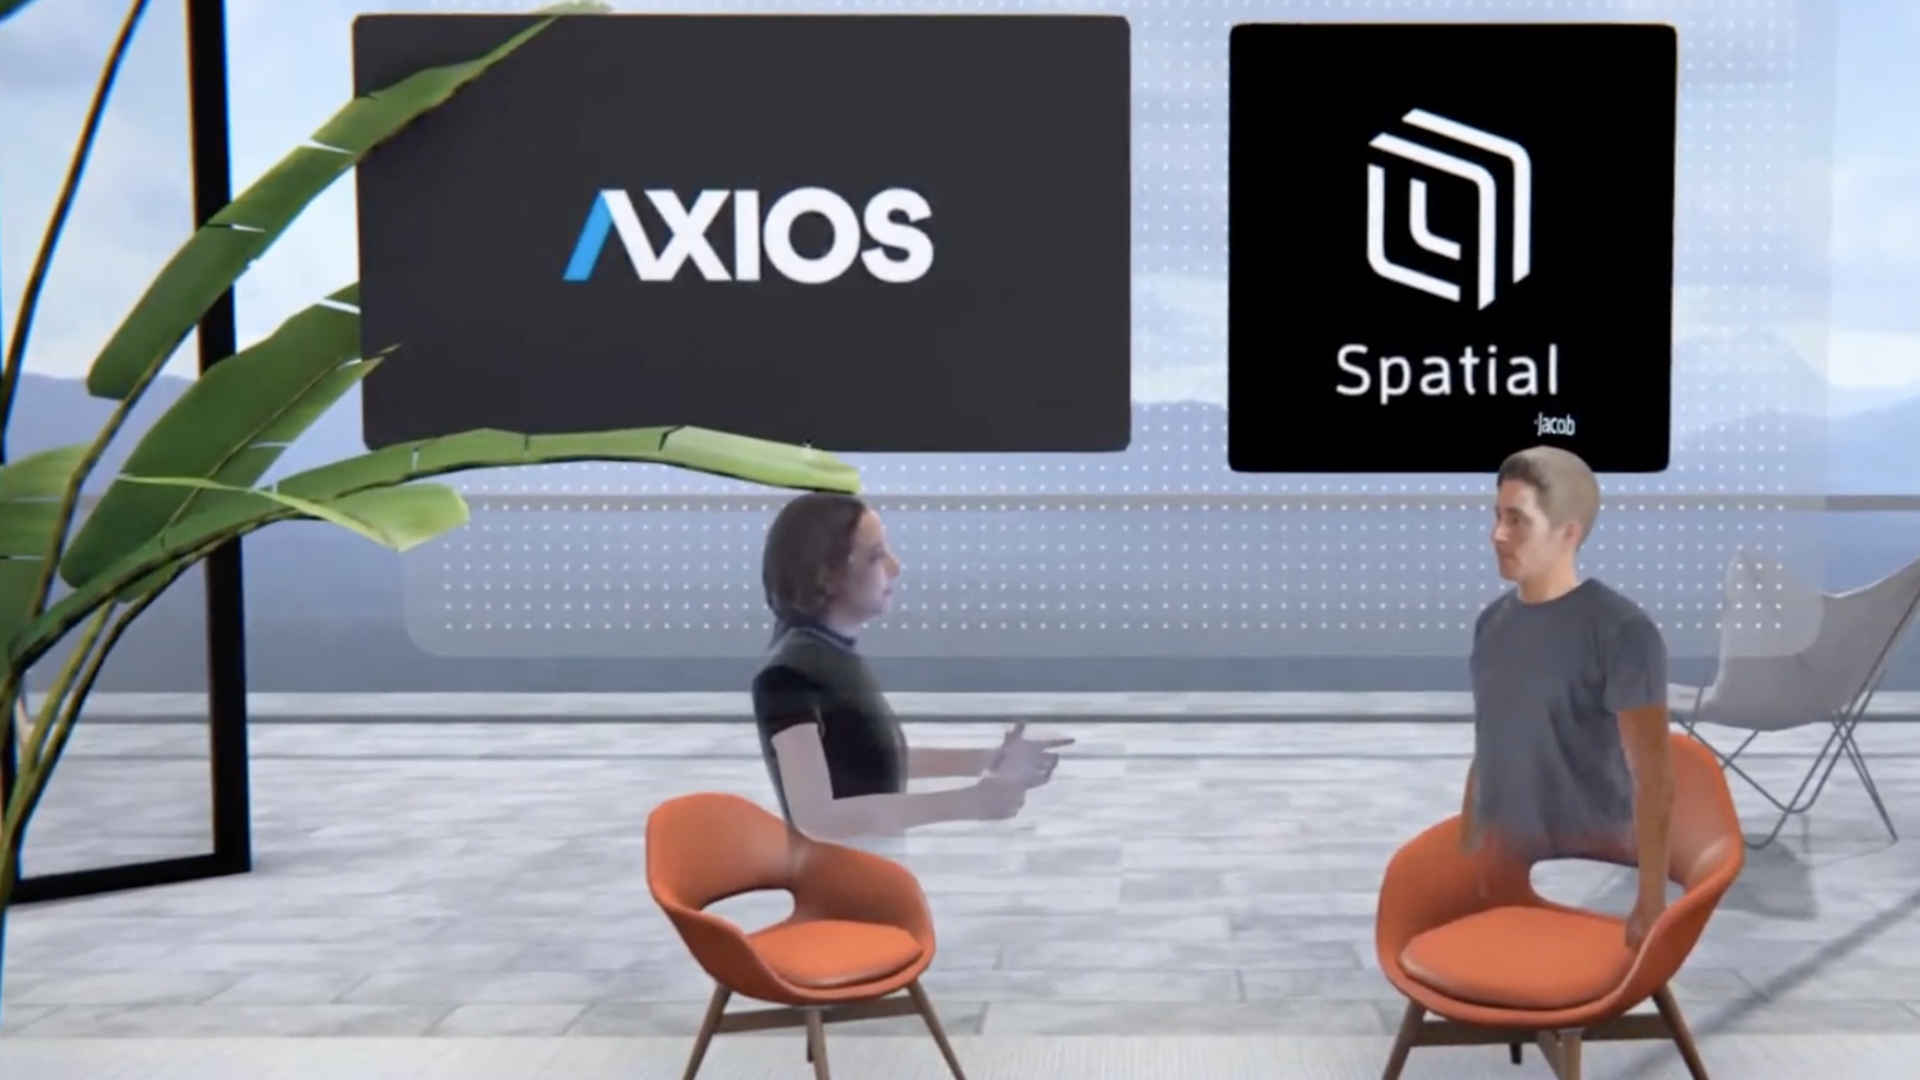 Spatial's Jacob Lowenstein speaks with Axios' Ina Fried, within Spatial's VR app